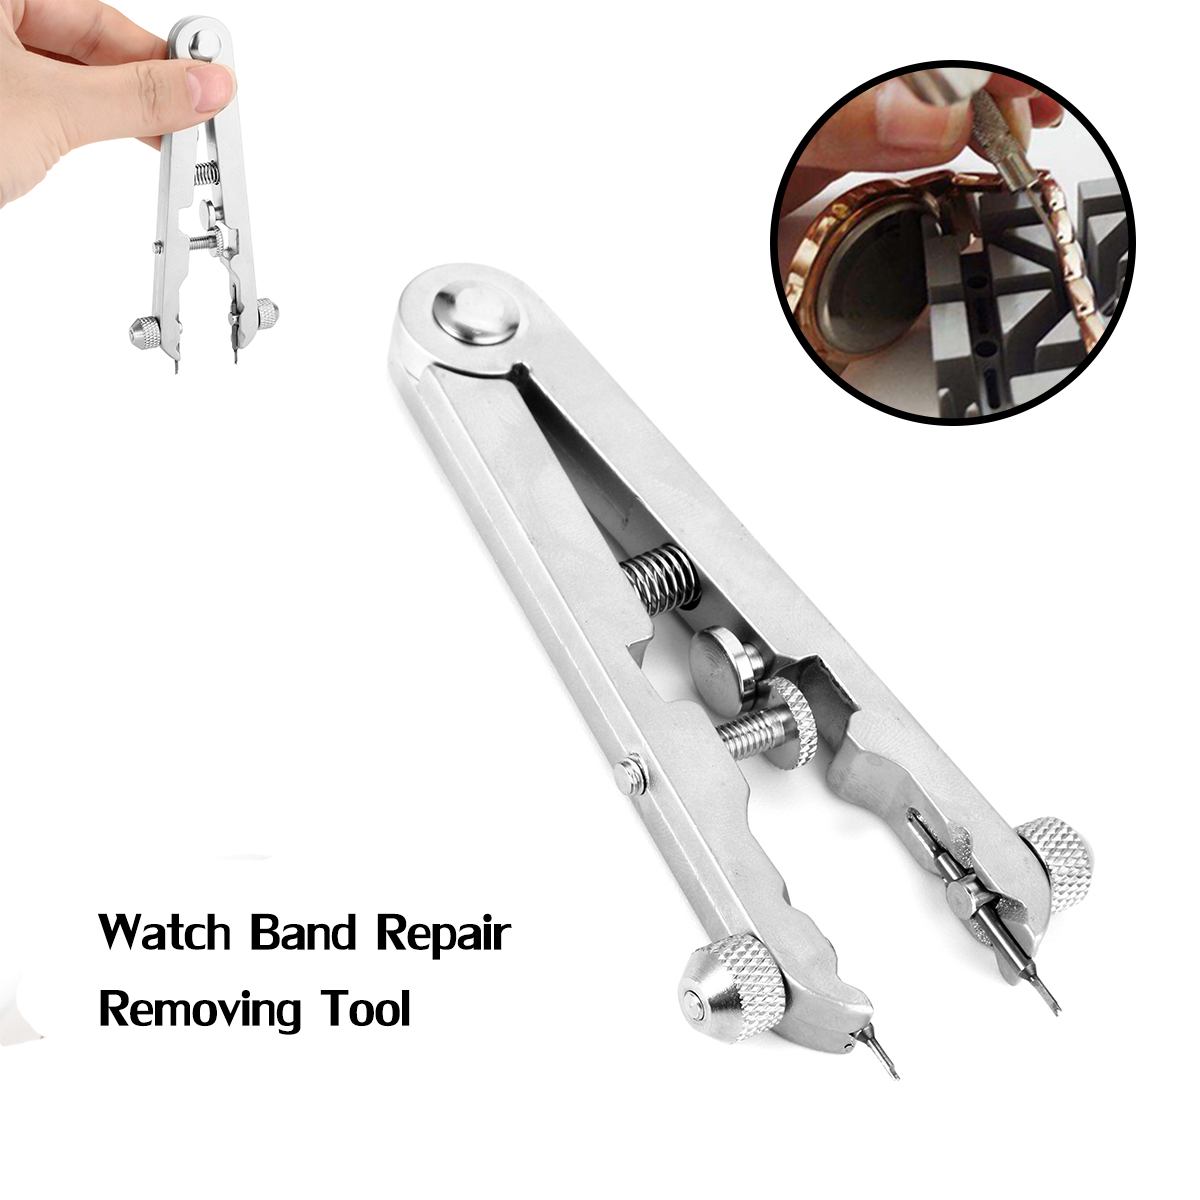 Watch-Bracelet-Spring-Bar-6825-Standard-Plier-Remover-Replace-Removing-Tool-1262786-2